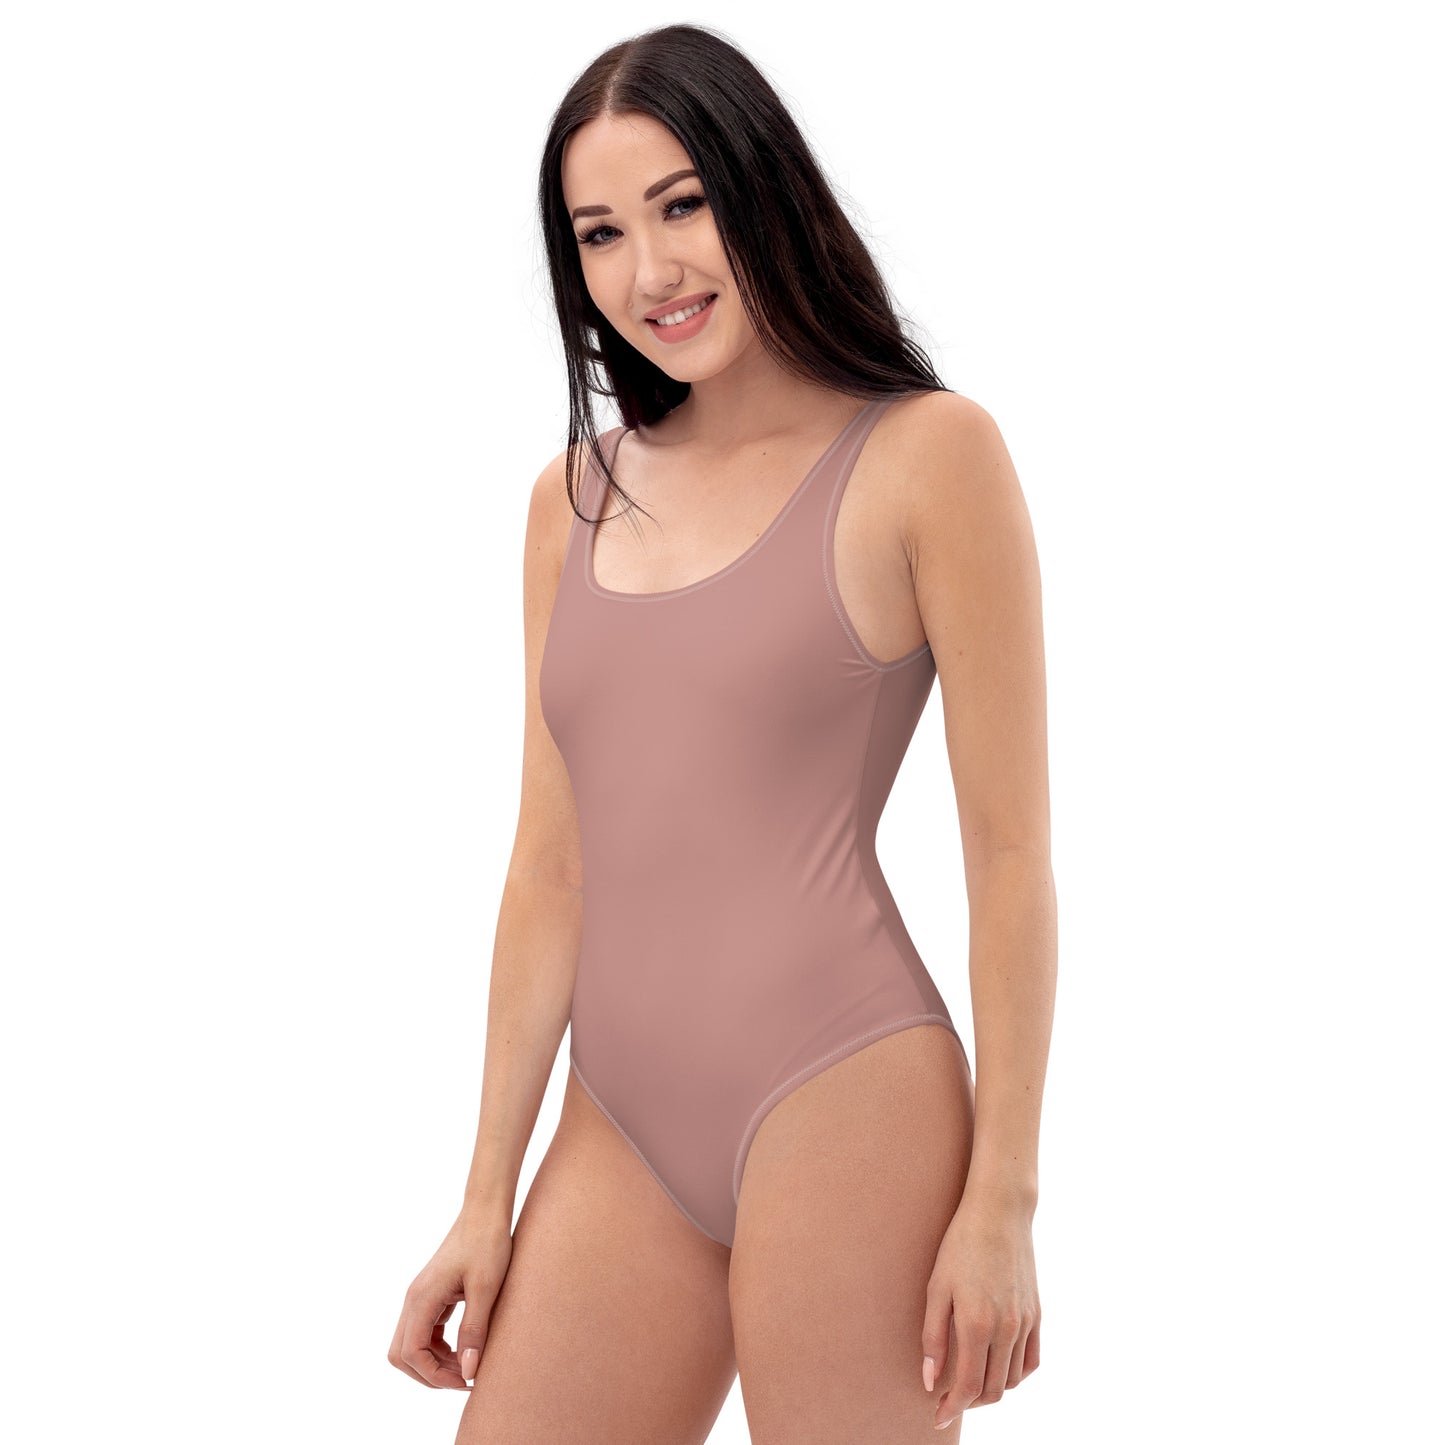 Multiple Nude Natural Skin Tone Colored  Smooth Fabric, Cheeky Fit One-Piece Comfortable Swimsuit TeeSpect